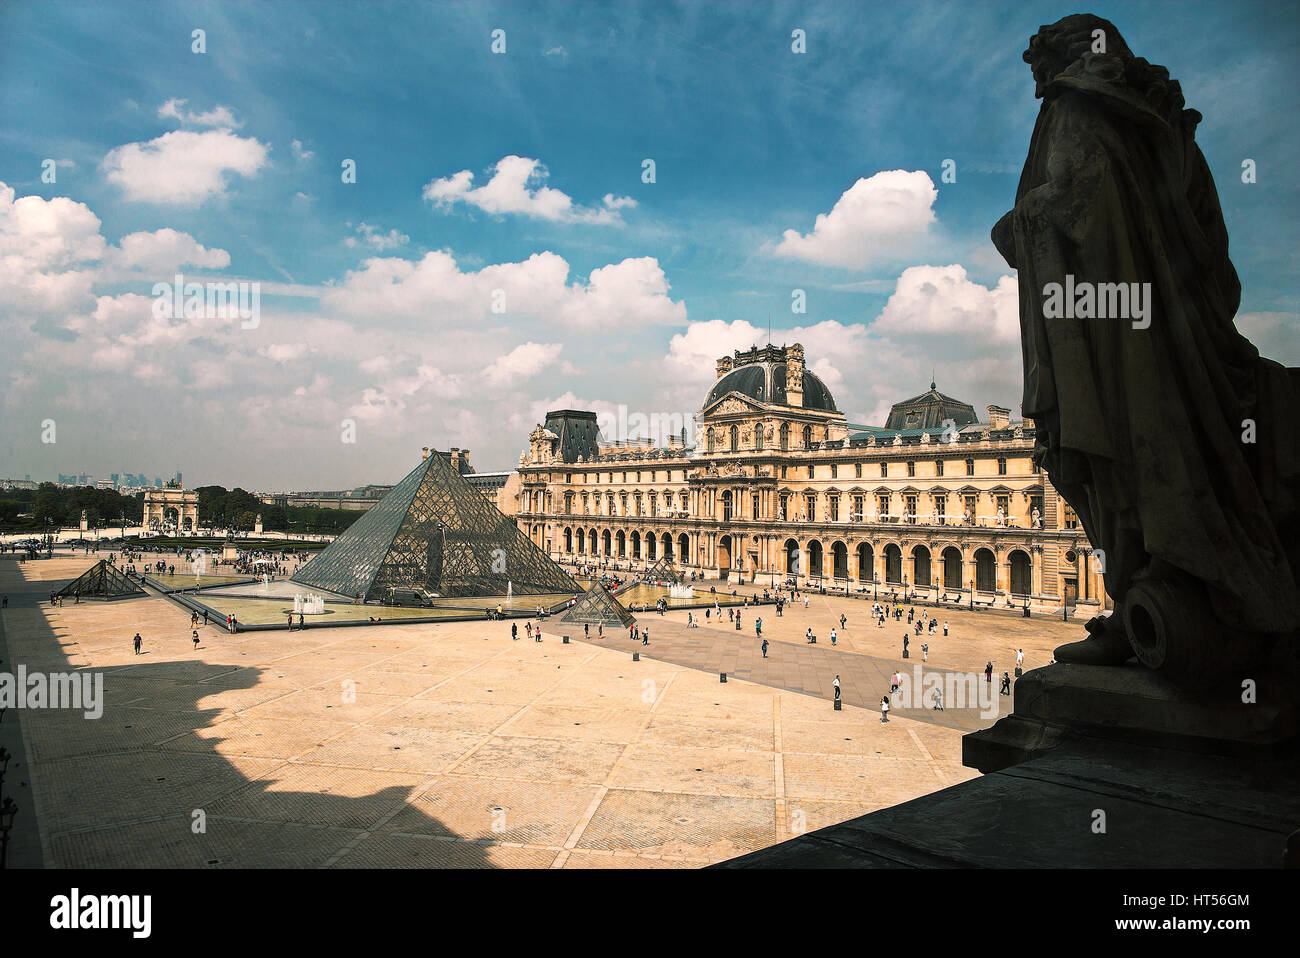 Glass pyramid at Musée du Louvre in the centre of Napoleon Courtyard.The piramid which functionts as the museum's mains entrance was built in 1989. Stock Photo